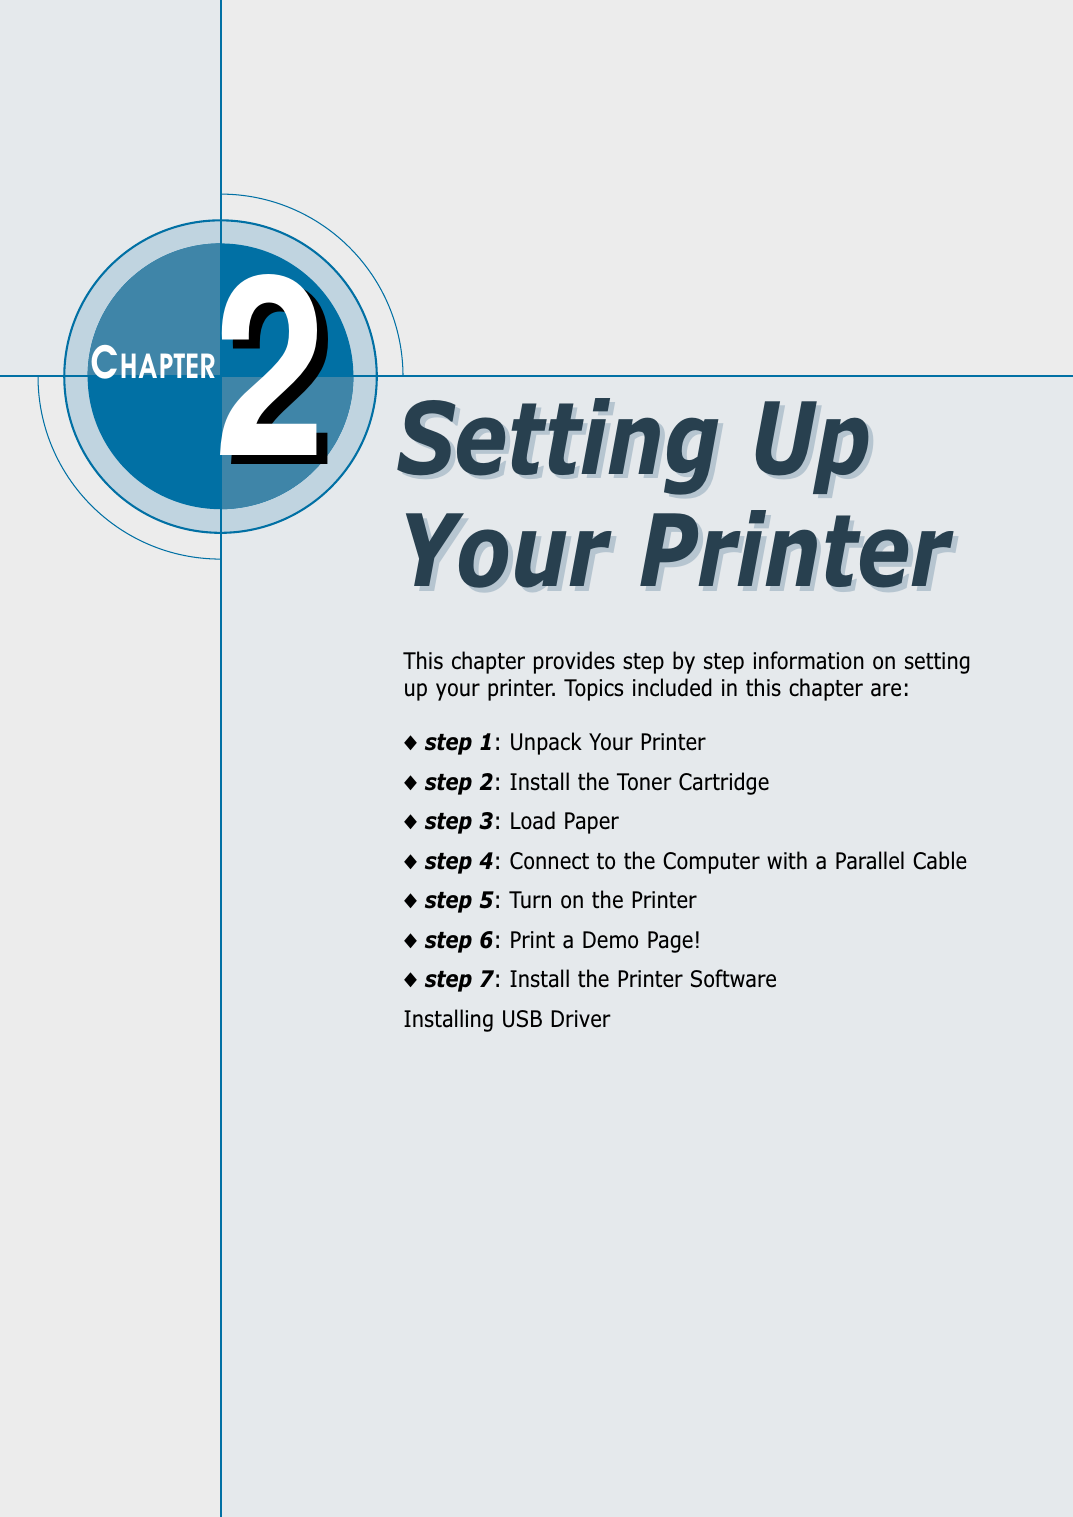 This chapter provides step by step information on settingup your printer. Topics included in this chapter are:◆step 1: Unpack Your Printer◆step 2: Install the Toner Cartridge◆step 3: Load Paper◆step 4: Connect to the Computer with a Parallel Cable◆step 5: Turn on the Printer◆step 6: Print a Demo Page!◆step 7: Install the Printer SoftwareInstalling USB Driver22CHAPTERSetting UpYour PrinterSetting UpYour Printer